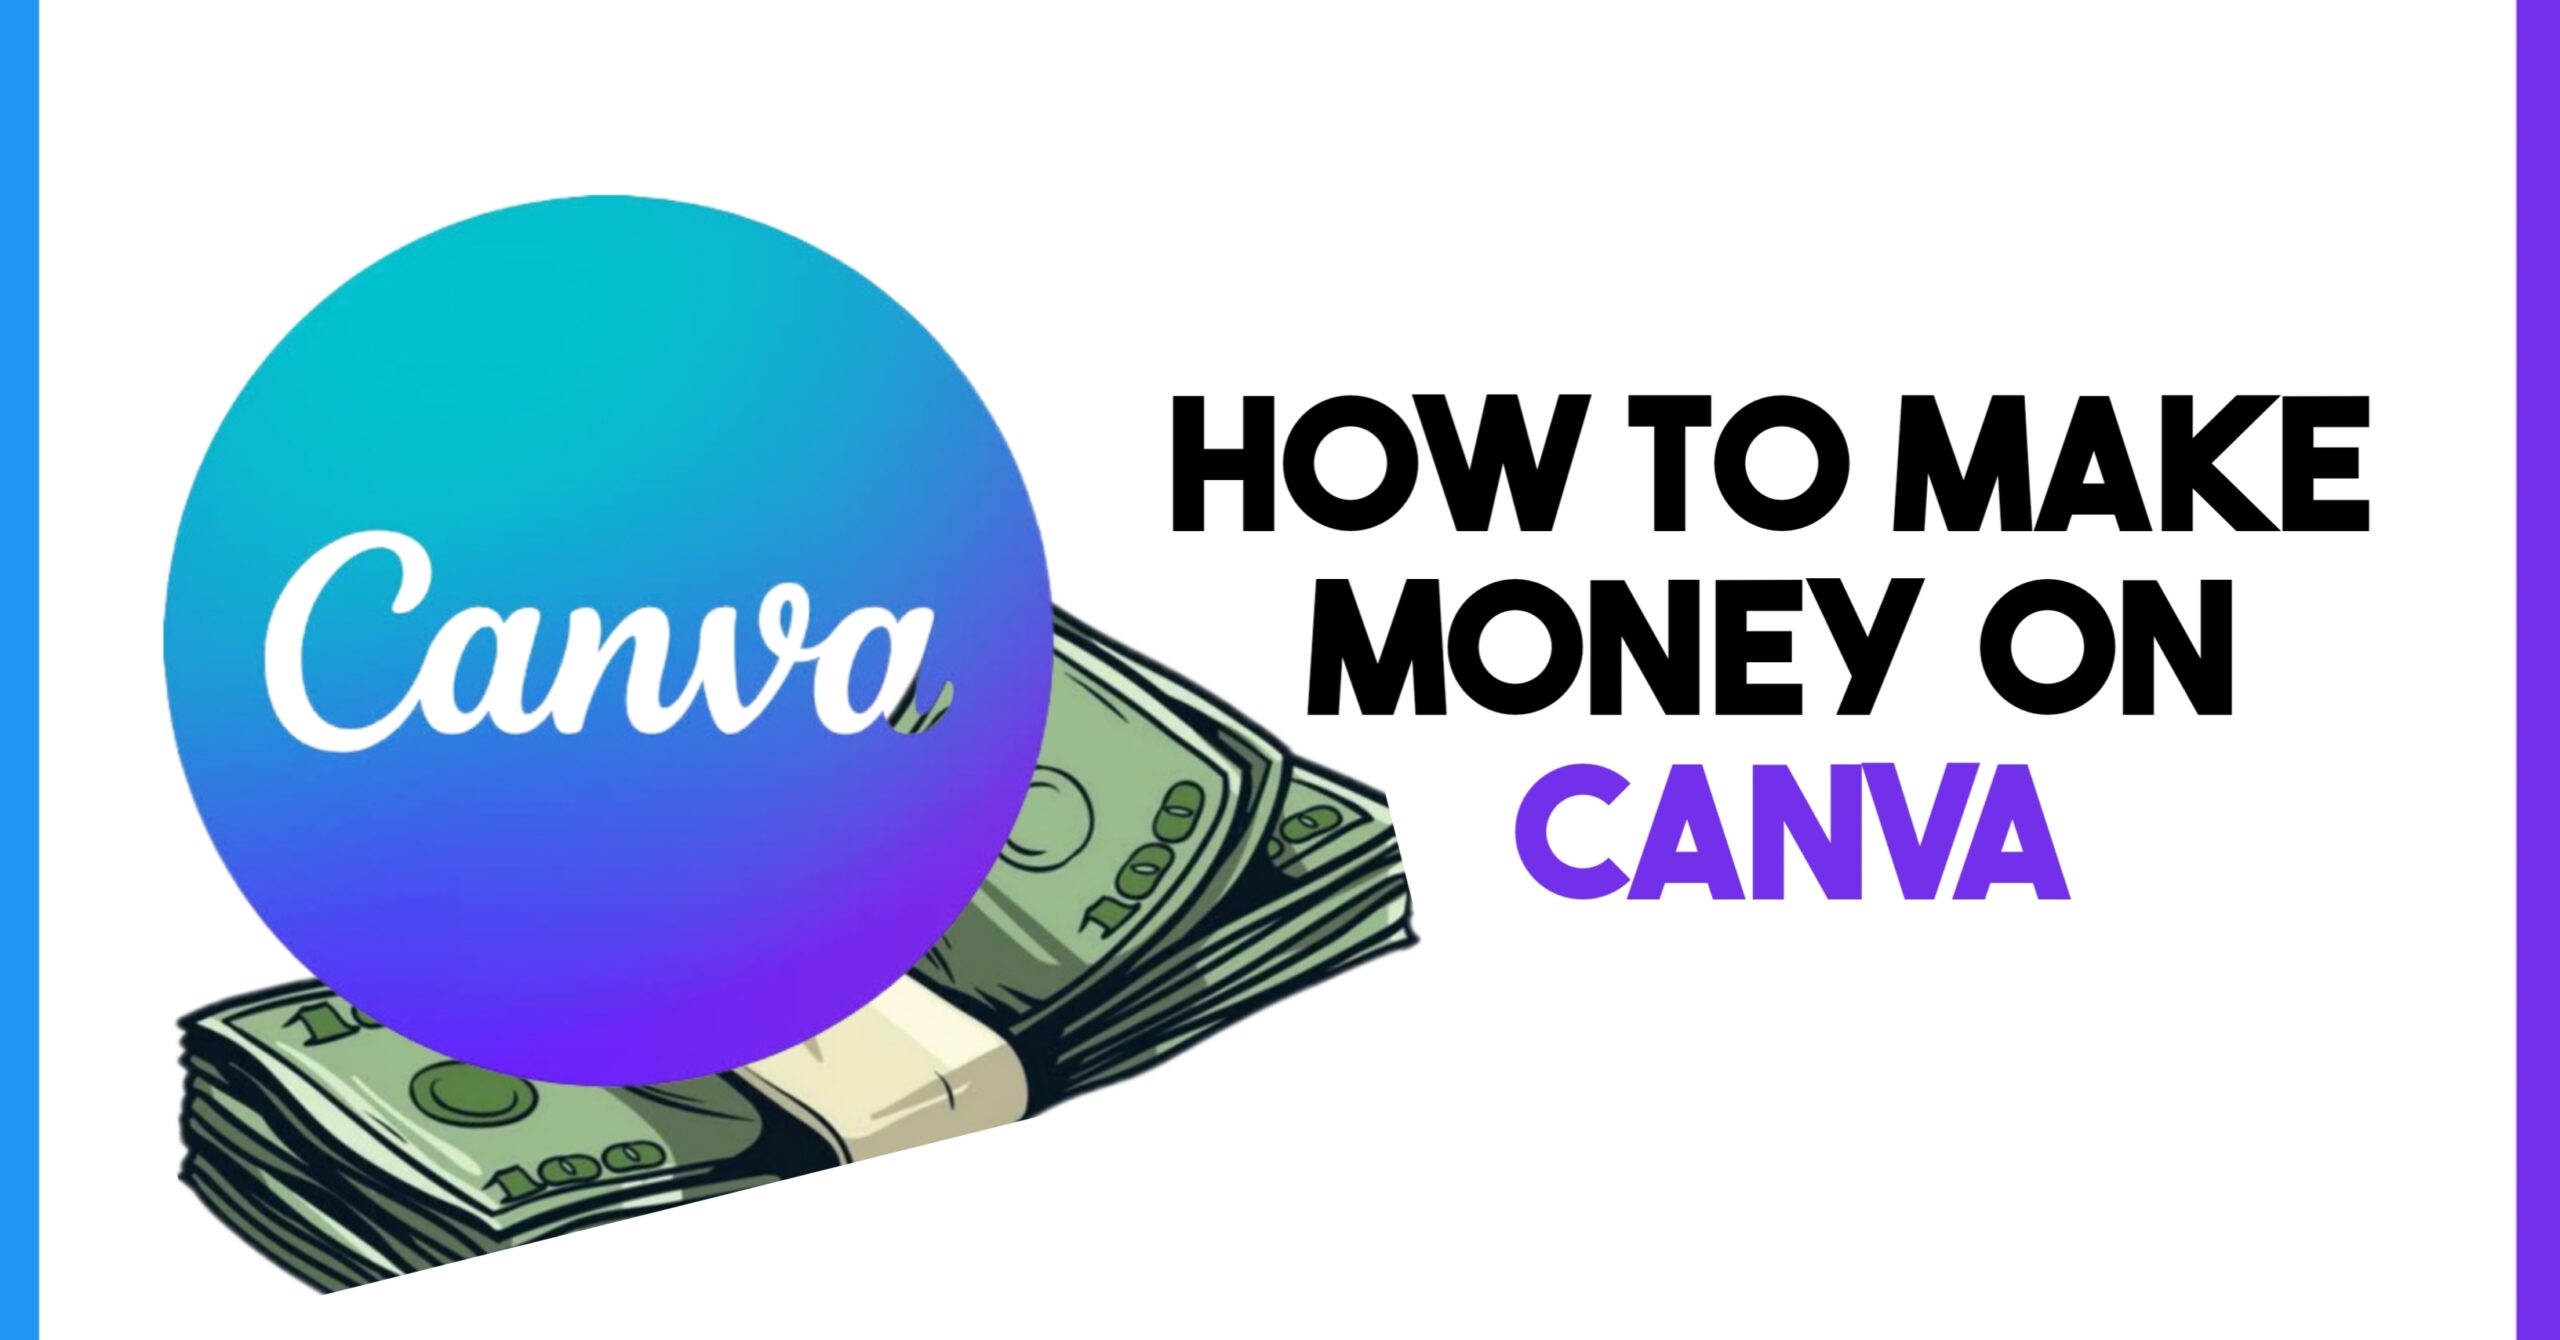 How to Make Money on Canva